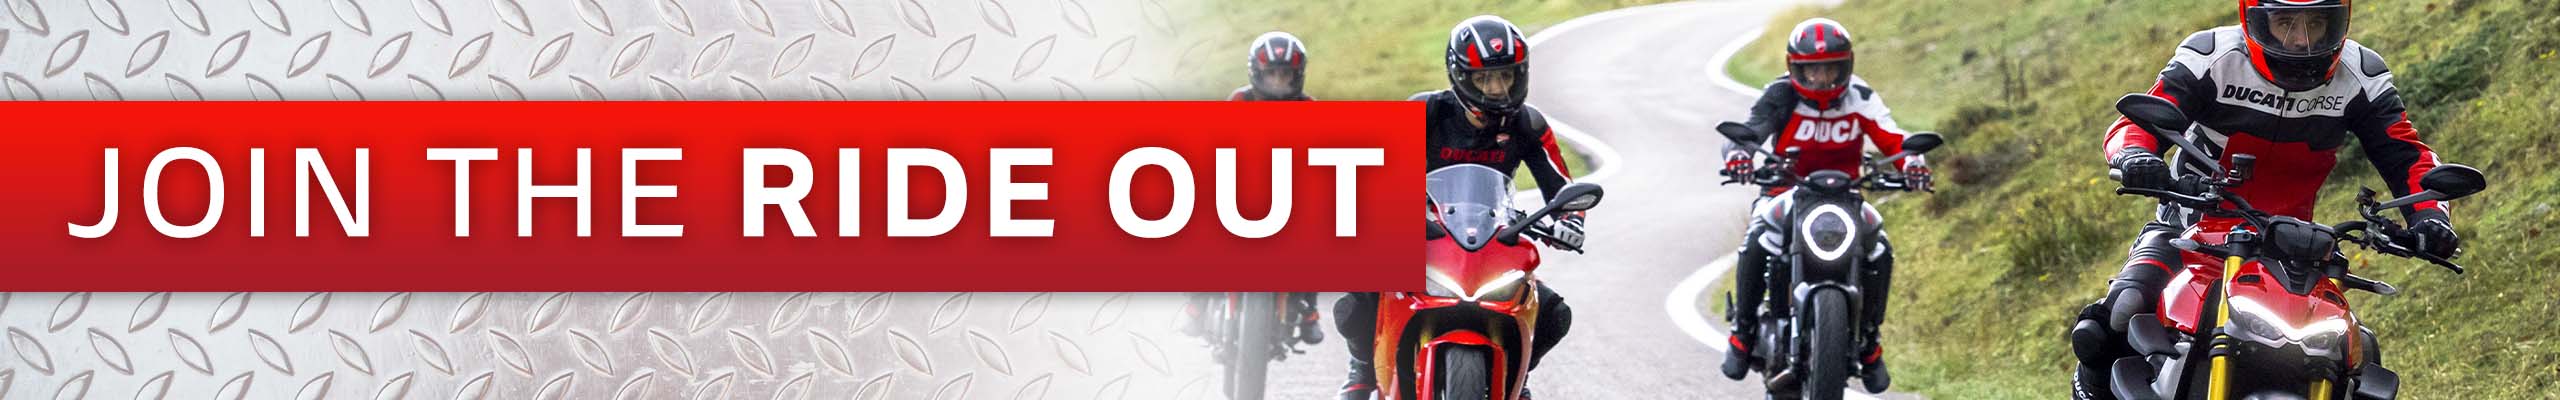 Join us at our Laguna Ducati Summer Celebration Event on Saturday 30th July and join the ride out led by the Kent Ducati Owners Club